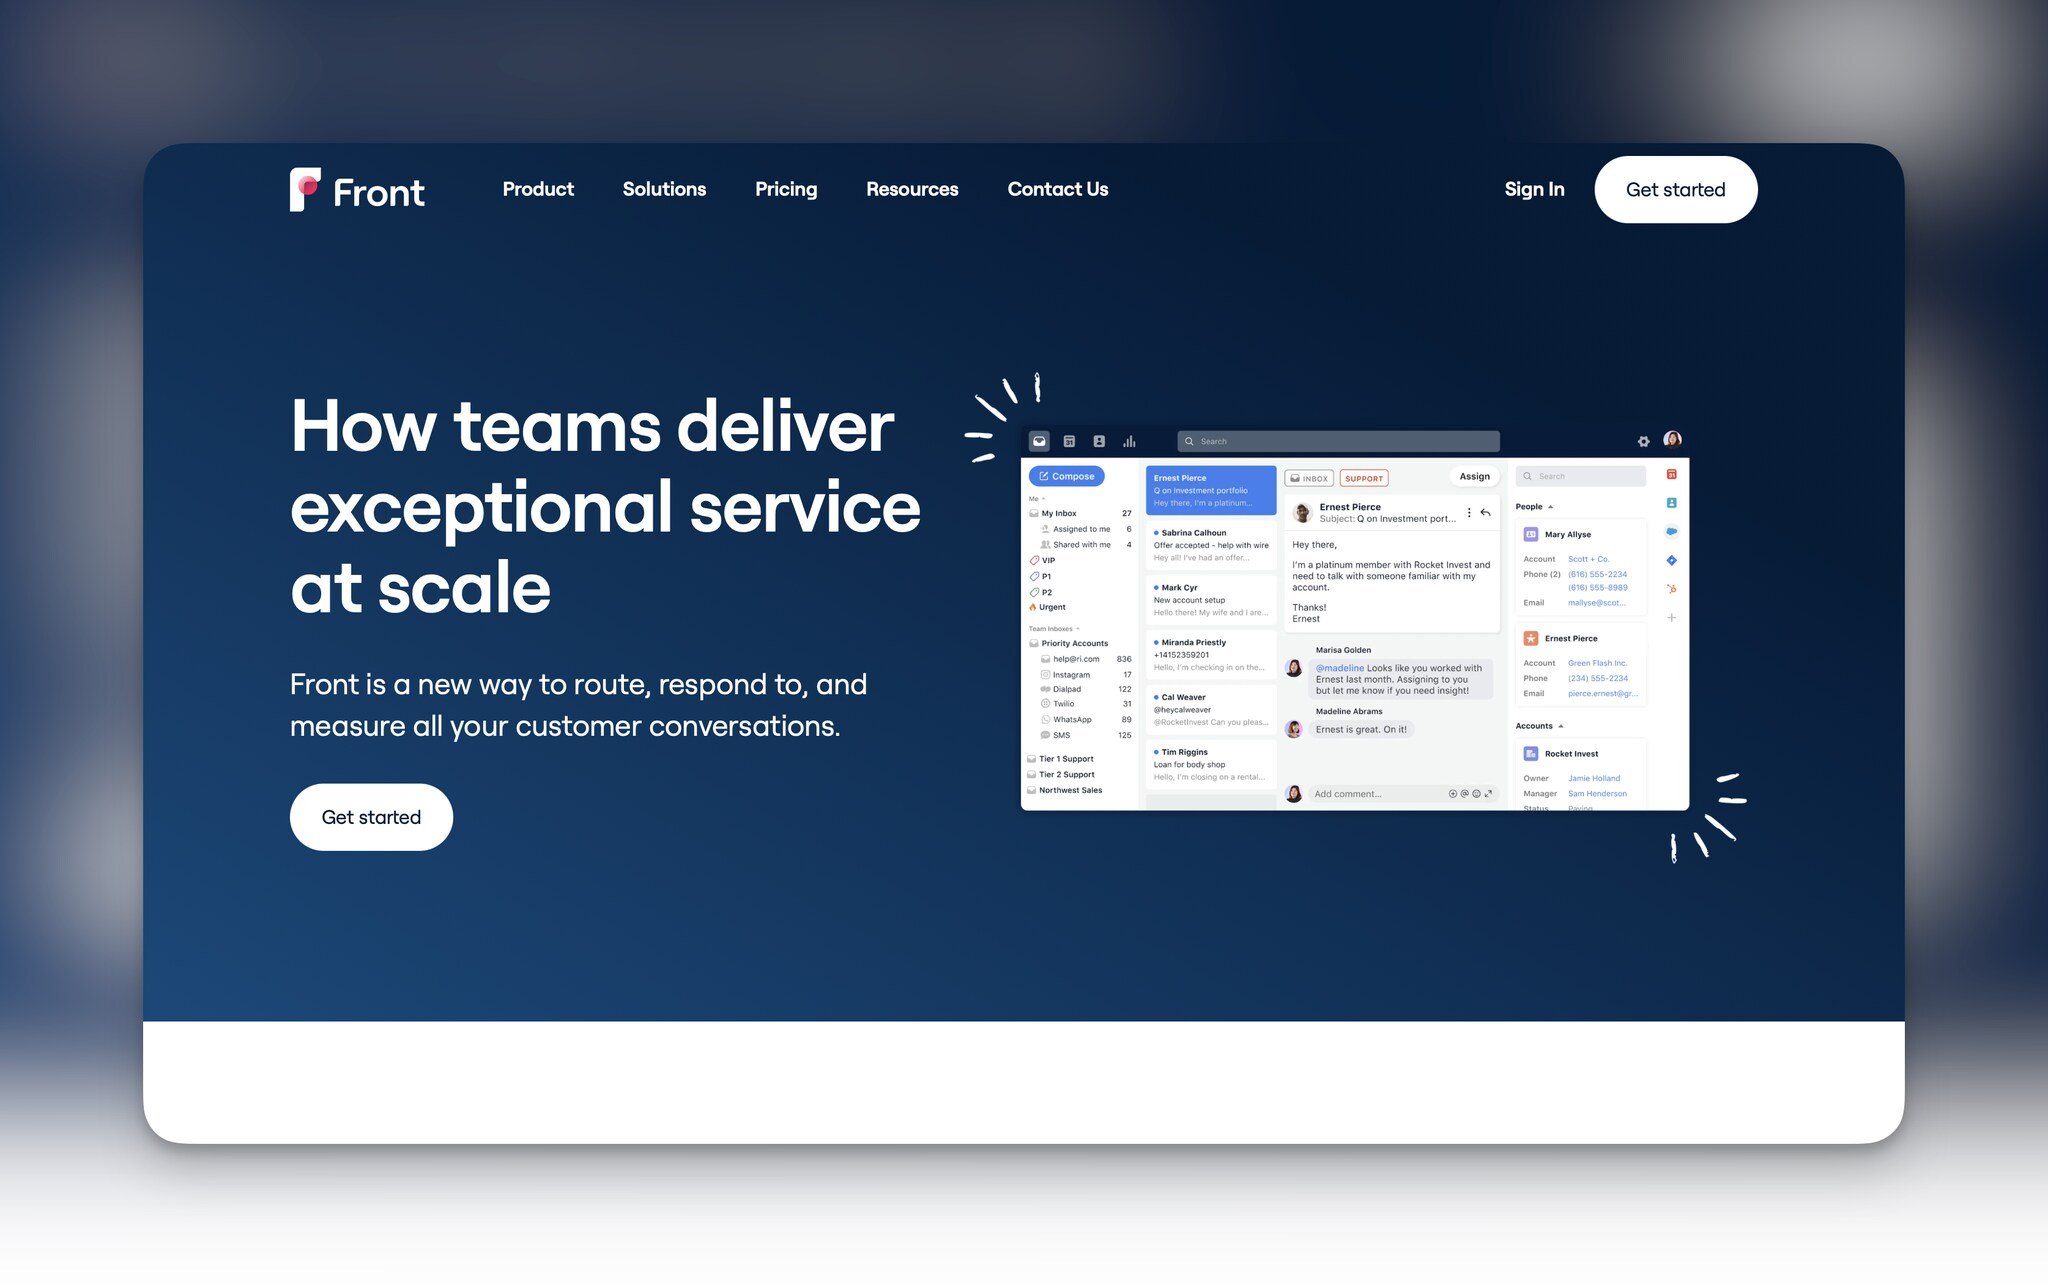 Front's homepage with "How teams deliver exceptional service at scale" headline on the left followed by a "Get started" button and on the right, there is a preview image window of the tool